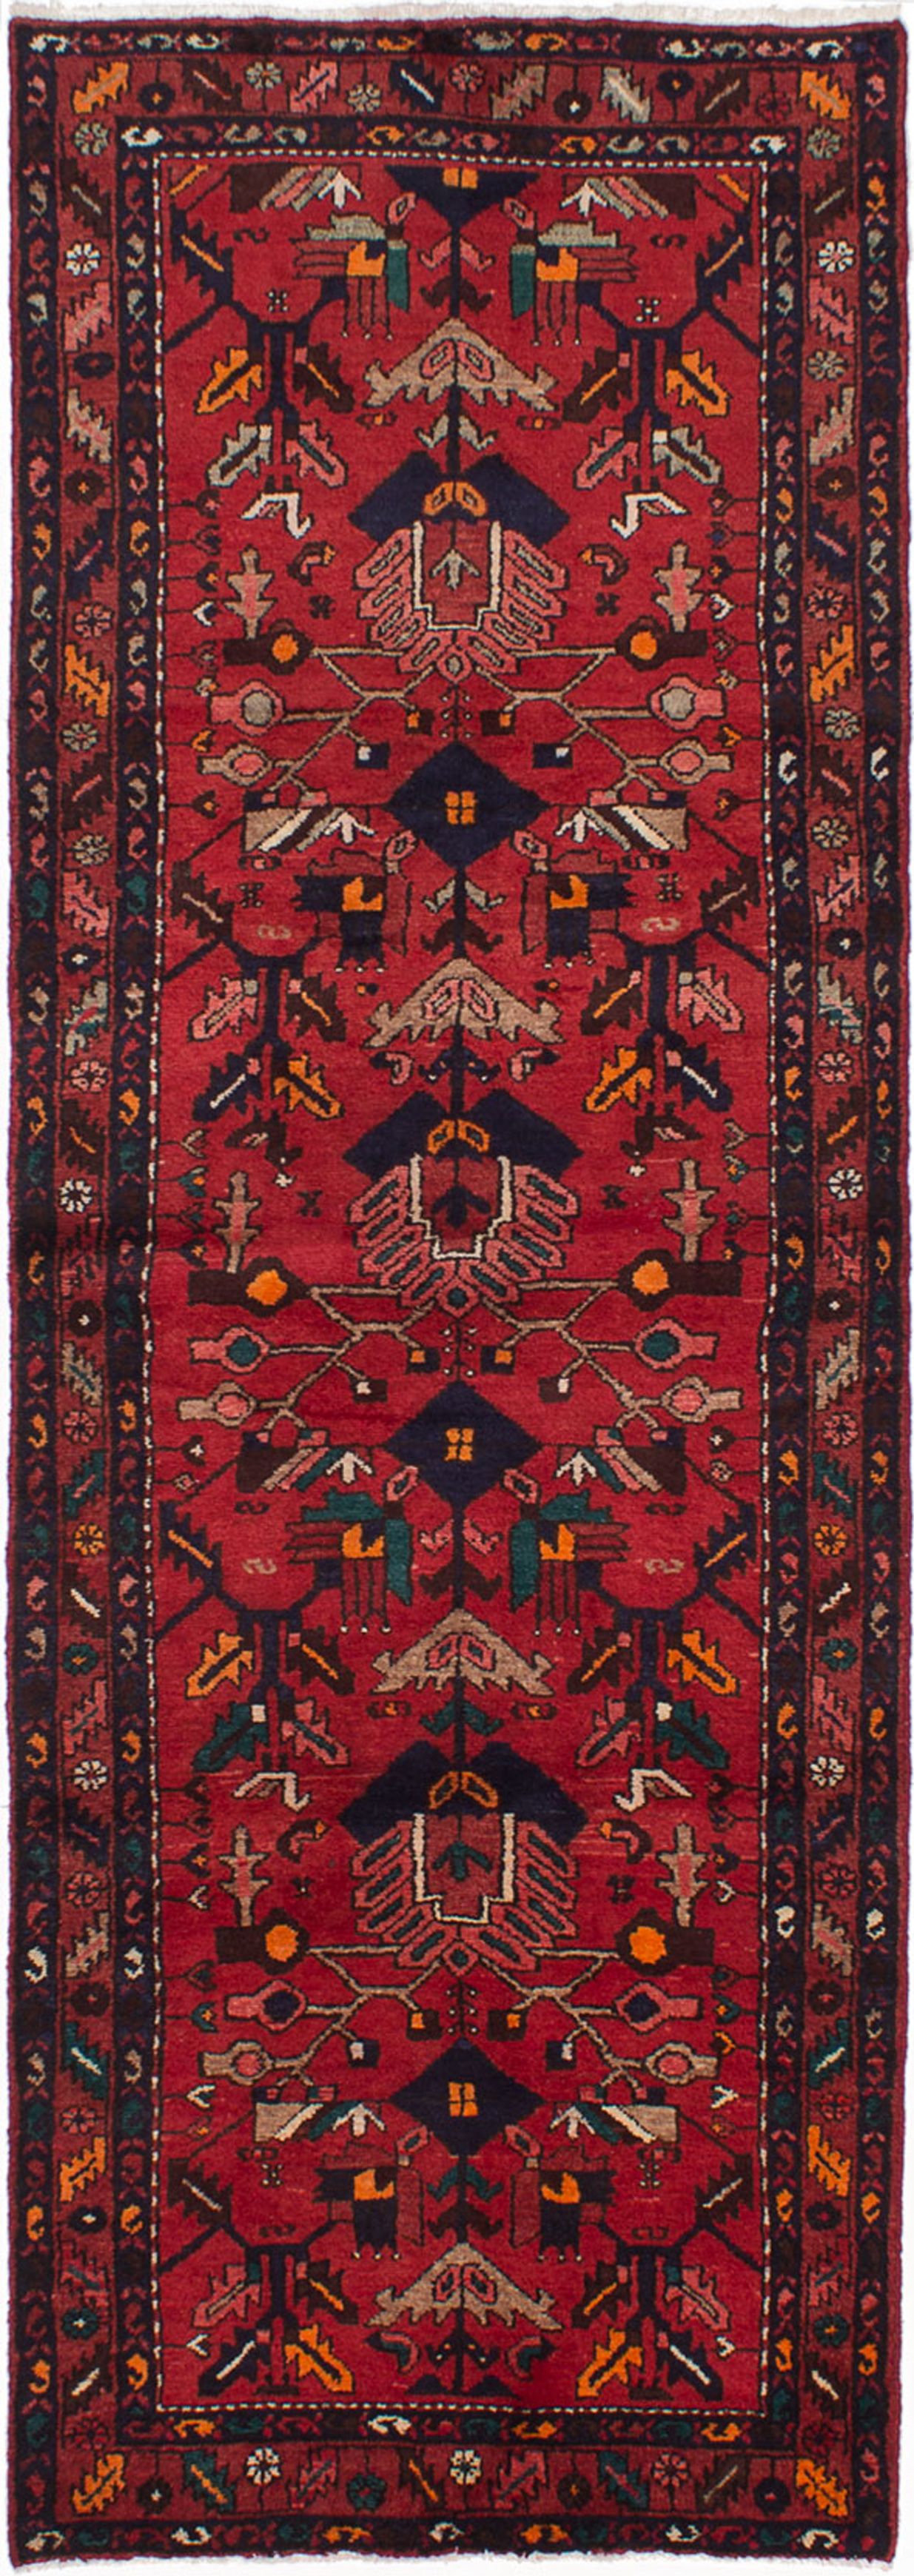 Hand-knotted Hamadan Red Wool Rug 3'3" x 9'7"  Size: 3'3" x 9'7"  